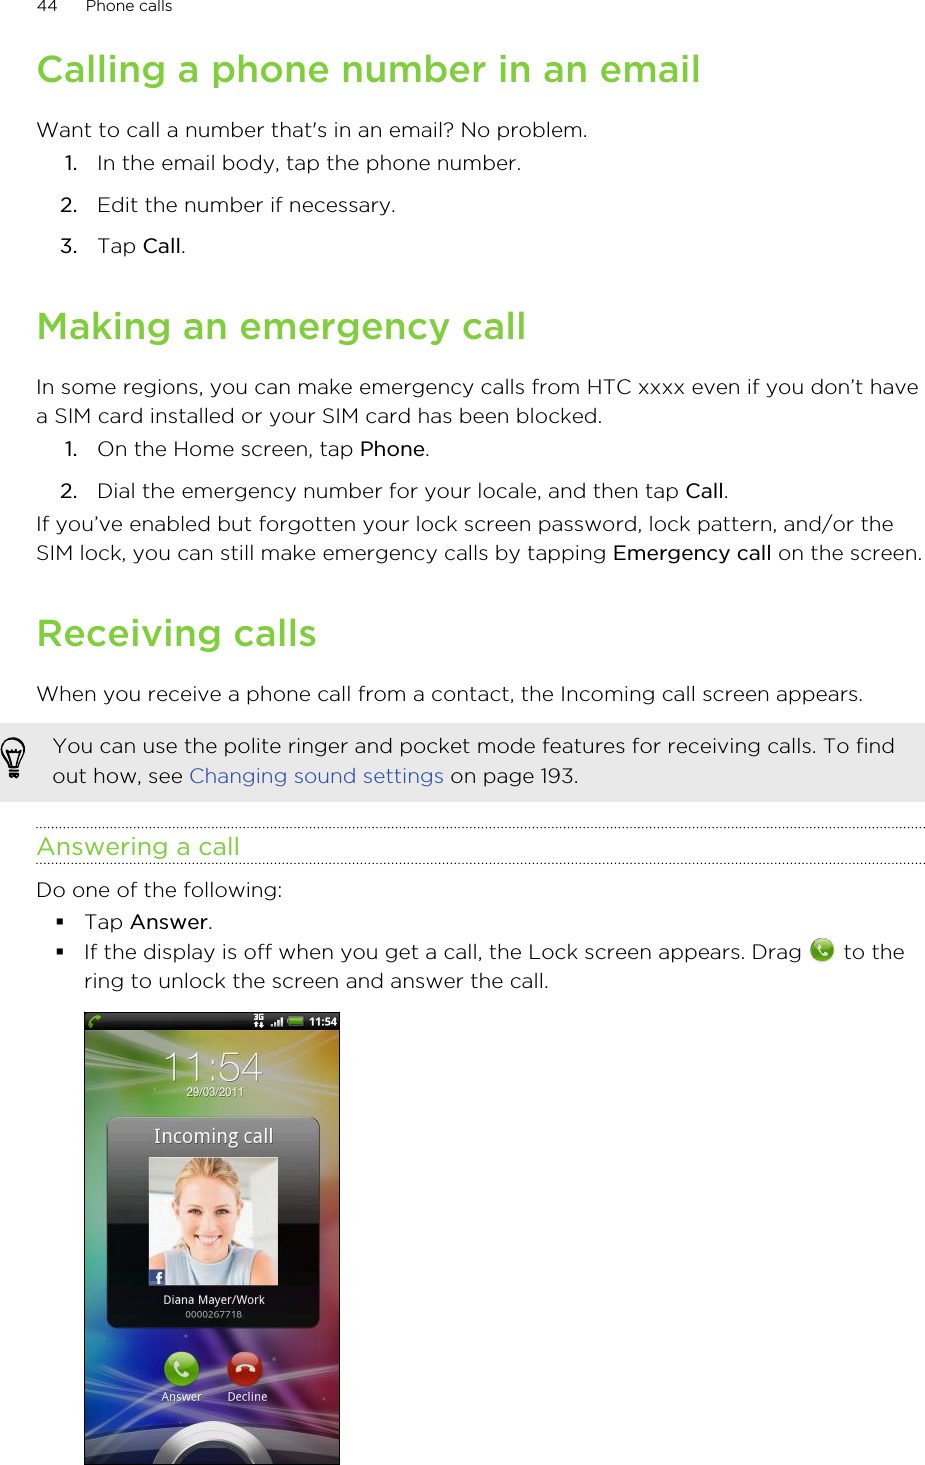 Calling a phone number in an emailWant to call a number that&apos;s in an email? No problem.1. In the email body, tap the phone number.2. Edit the number if necessary.3. Tap Call.Making an emergency callIn some regions, you can make emergency calls from HTC xxxx even if you don’t havea SIM card installed or your SIM card has been blocked.1. On the Home screen, tap Phone.2. Dial the emergency number for your locale, and then tap Call.If you’ve enabled but forgotten your lock screen password, lock pattern, and/or theSIM lock, you can still make emergency calls by tapping Emergency call on the screen.Receiving callsWhen you receive a phone call from a contact, the Incoming call screen appears.You can use the polite ringer and pocket mode features for receiving calls. To findout how, see Changing sound settings on page 193.Answering a callDo one of the following:§Tap Answer.§If the display is off when you get a call, the Lock screen appears. Drag   to thering to unlock the screen and answer the call.44 Phone calls